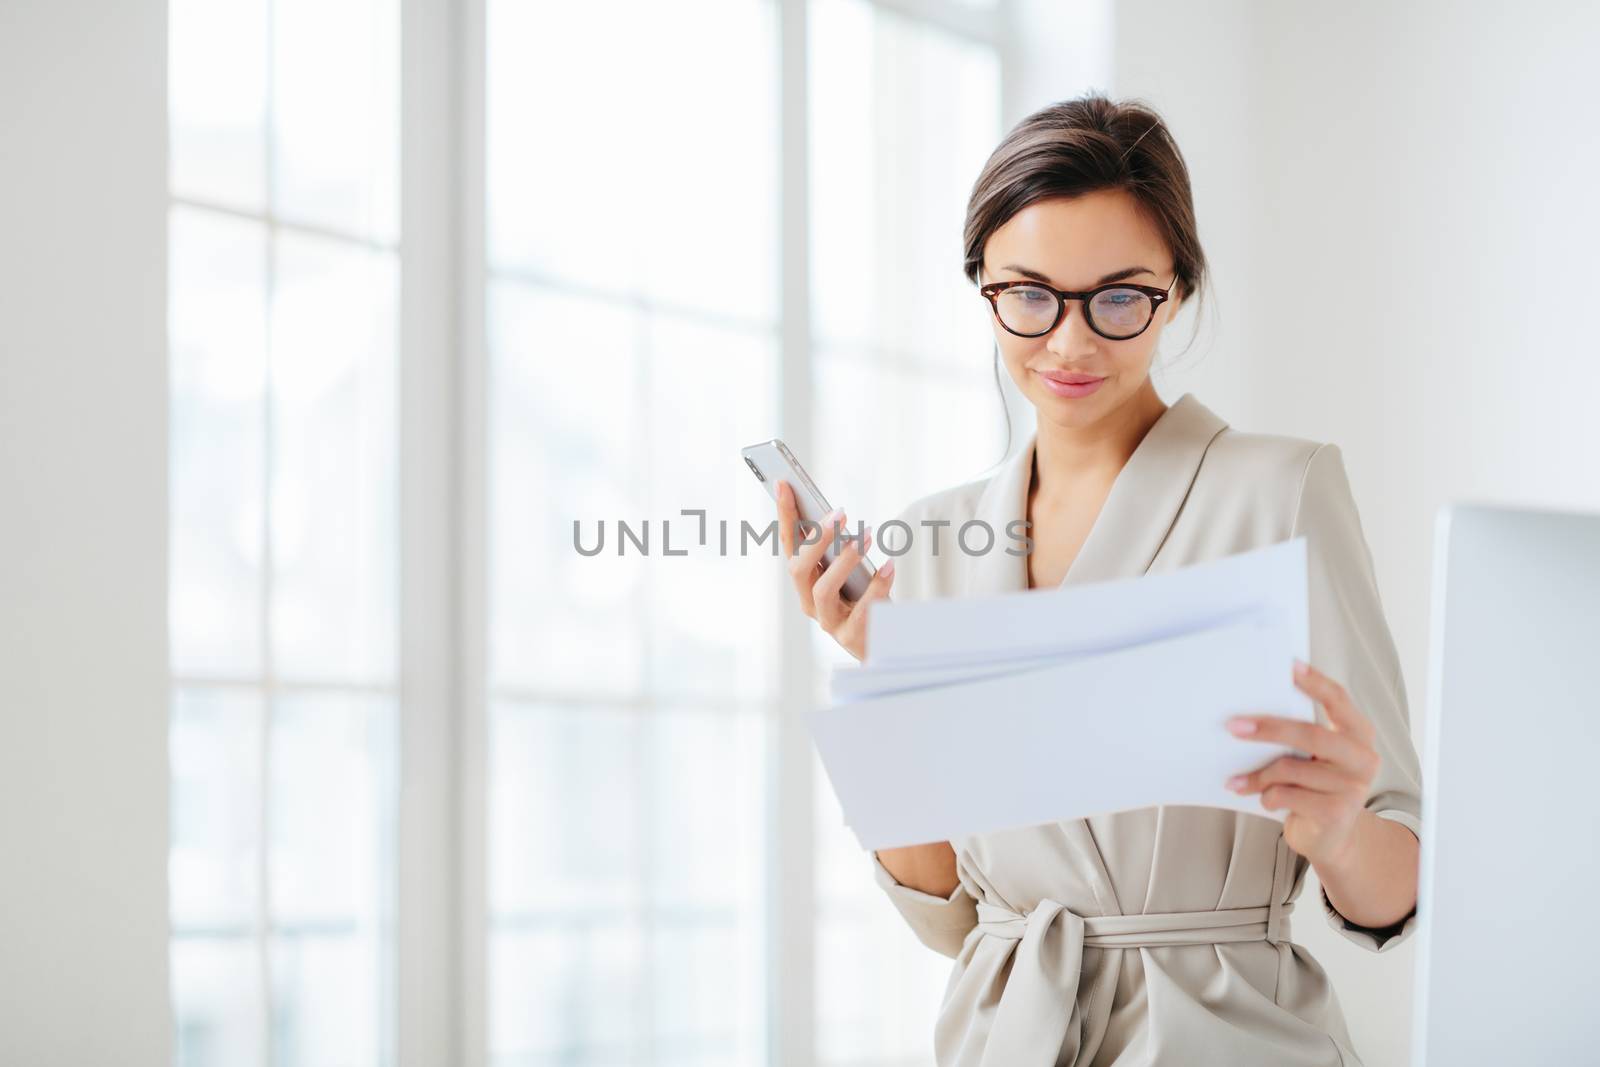 Satisfied female employee focused in documents, reads prepared report attentively, holds modern smartphone, wears transparent glasses and business suit poses over office interior checks monthly income by vkstock